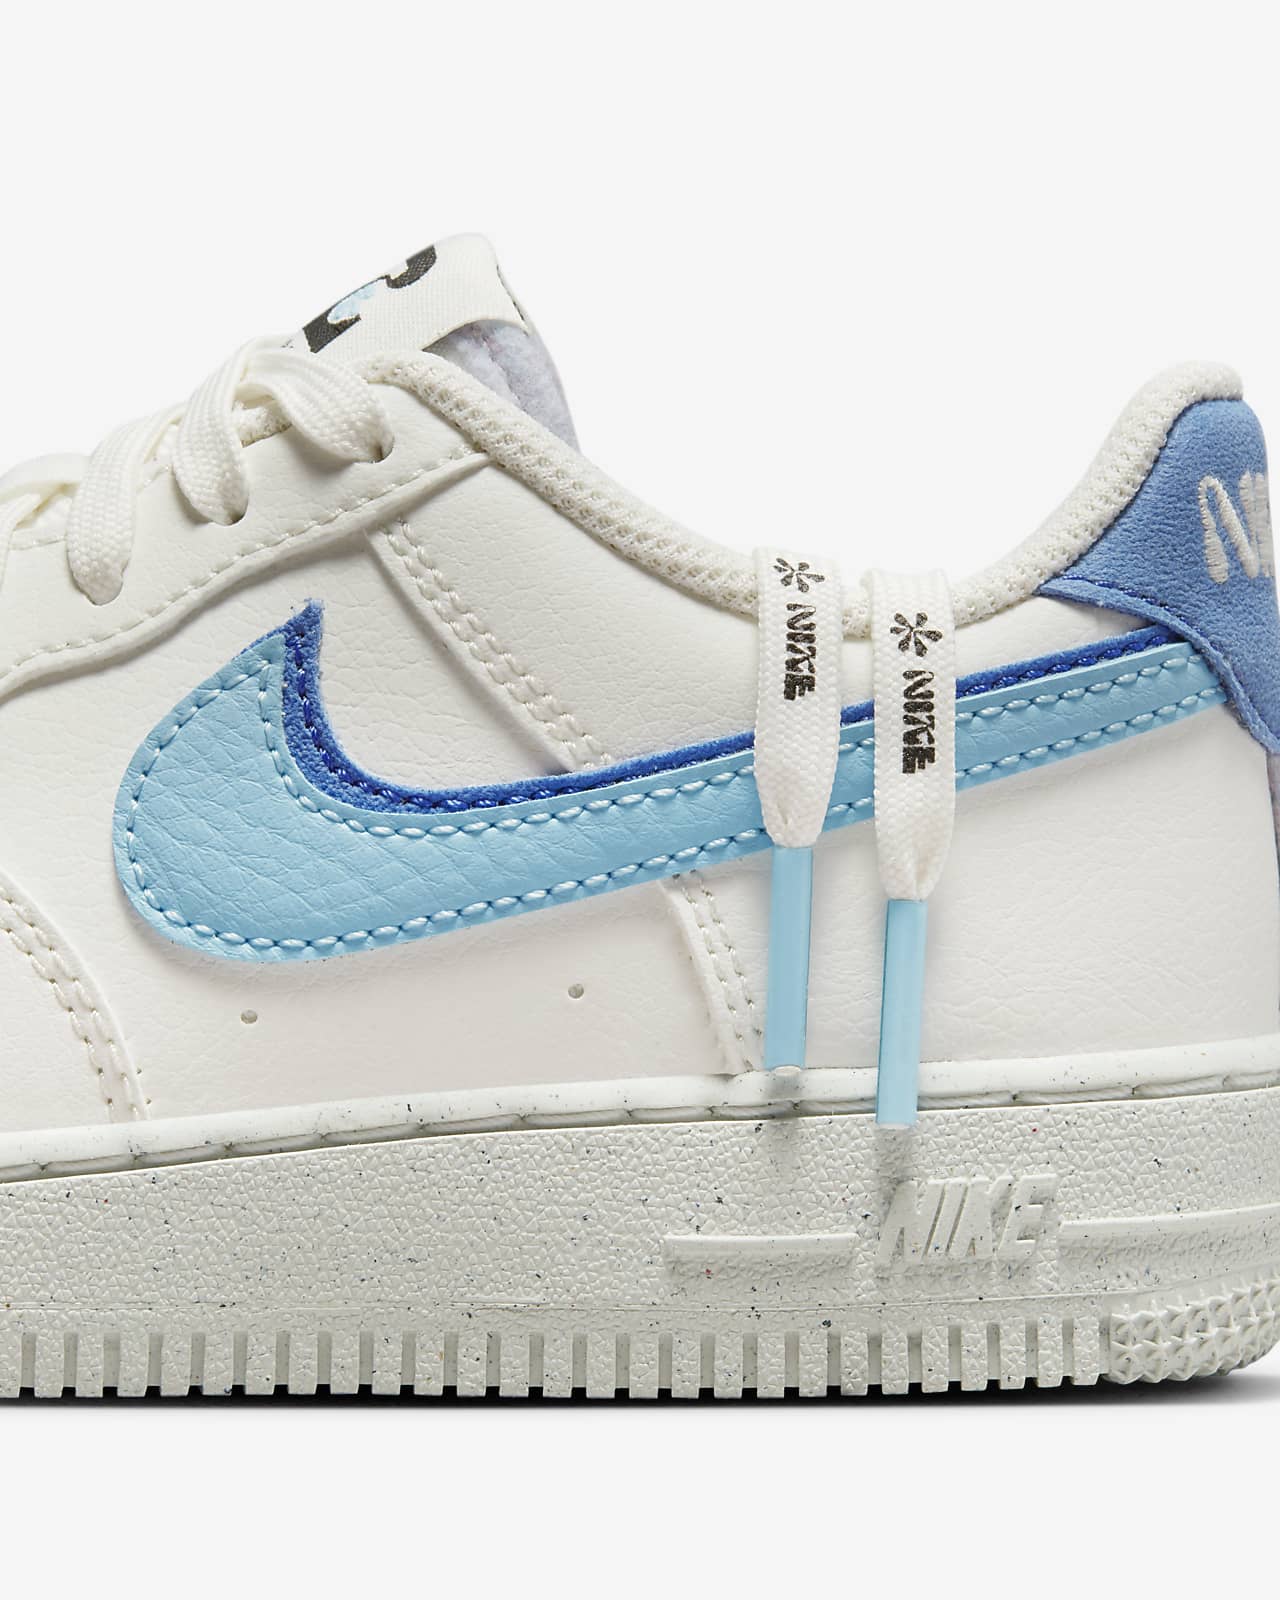 Nike Air Force 1 LV8 Youth